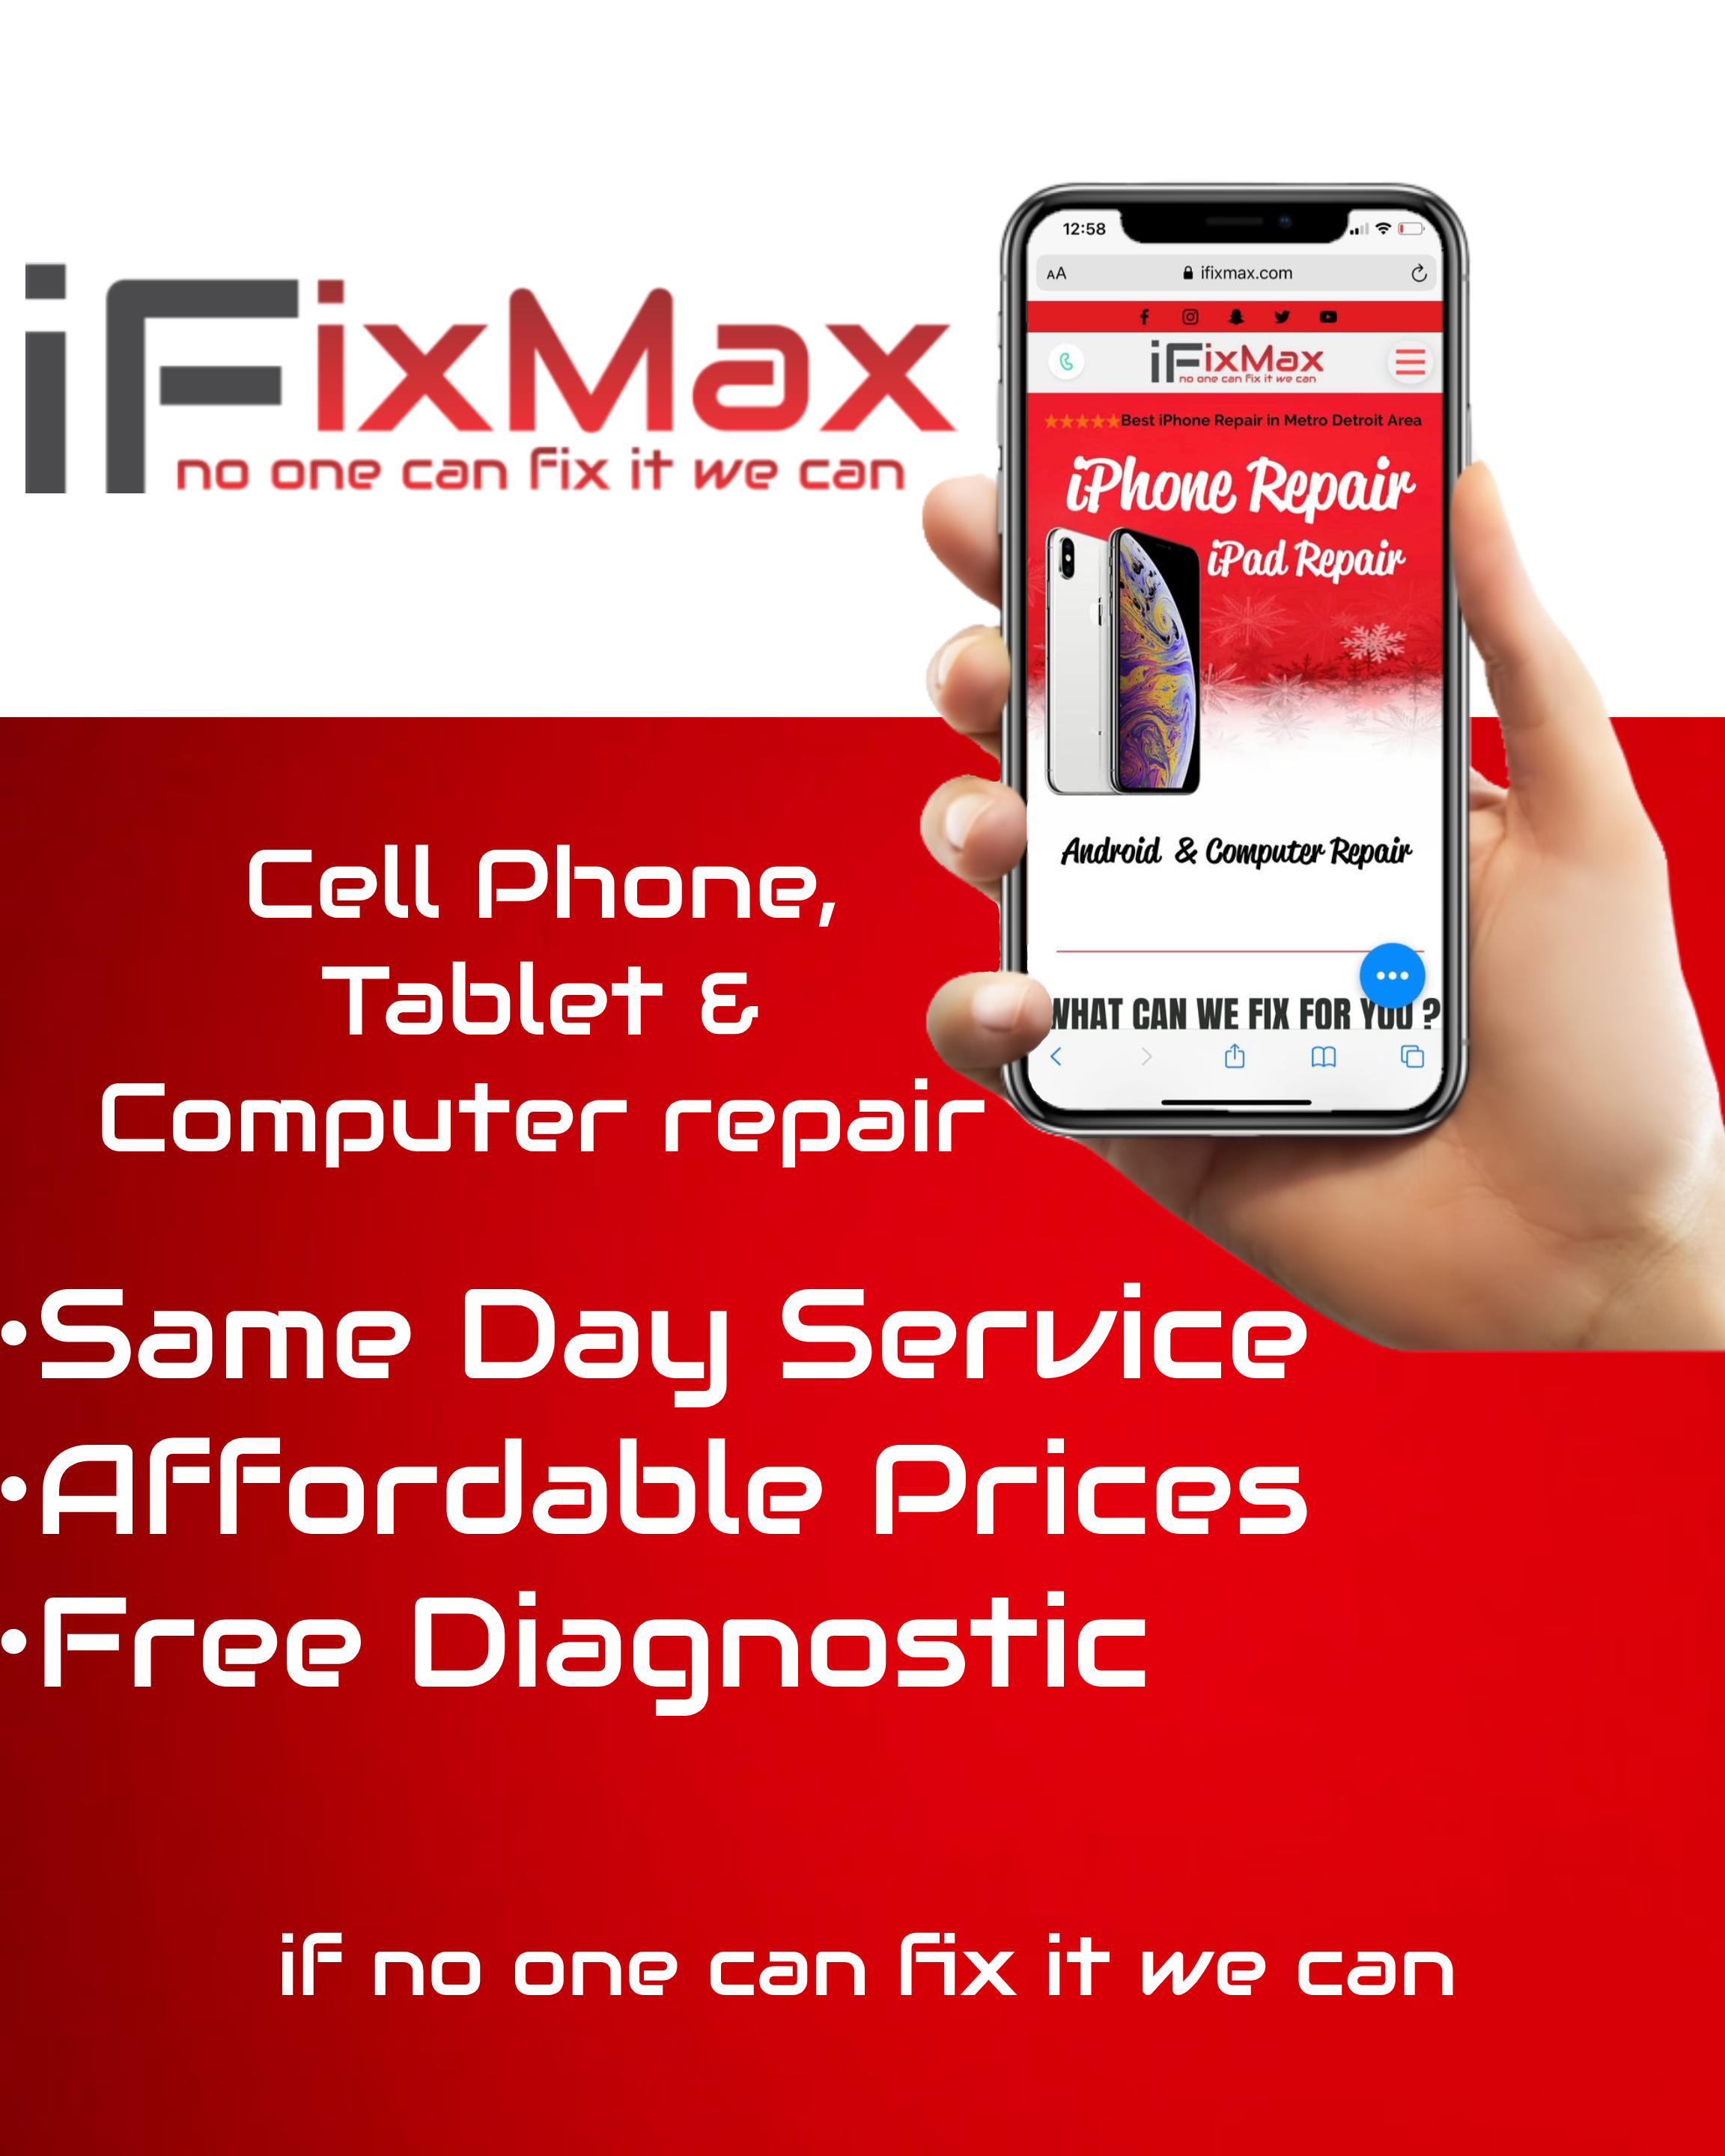 iFixMax - Cell Phone, Tablet & Computer Repair